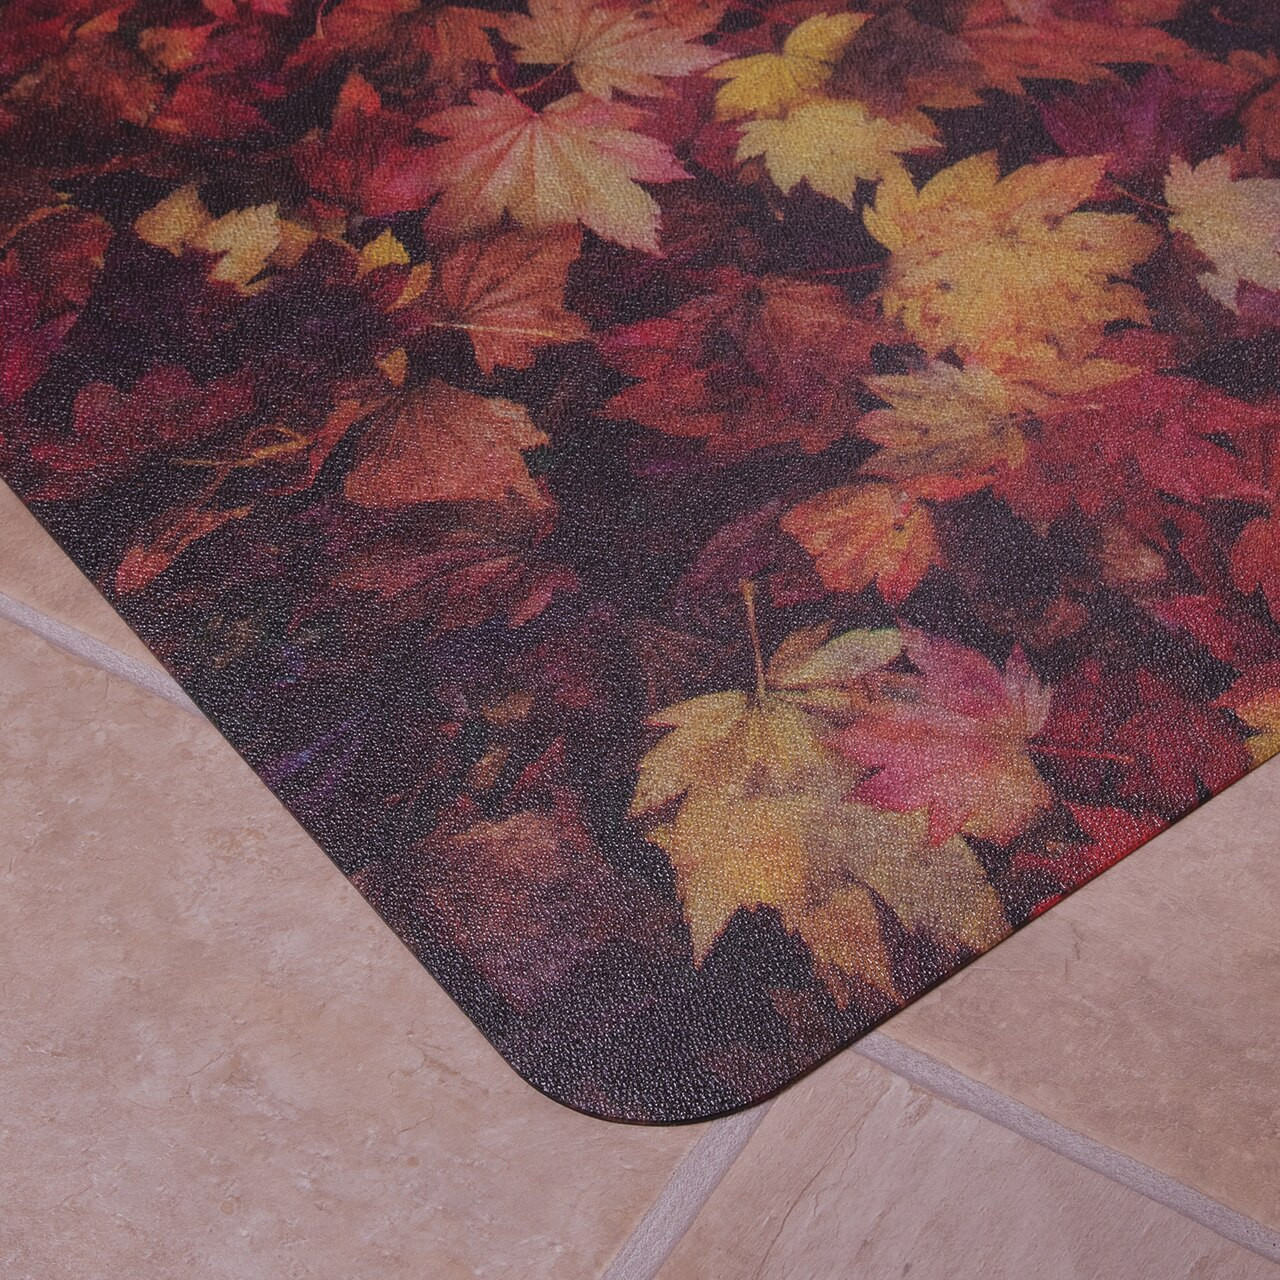 https://cdn11.bigcommerce.com/s-fjwps1jbkv/images/stencil/1280x1280/products/259/3174/colortex-photomat-or-colorful-general-purpose-floor-mat-for-hard-floors-or-rectangular-with-autumn-leaves-photo-design-or-size-36-x-48__61056.1688989240.jpg?c=2?imbypass=on